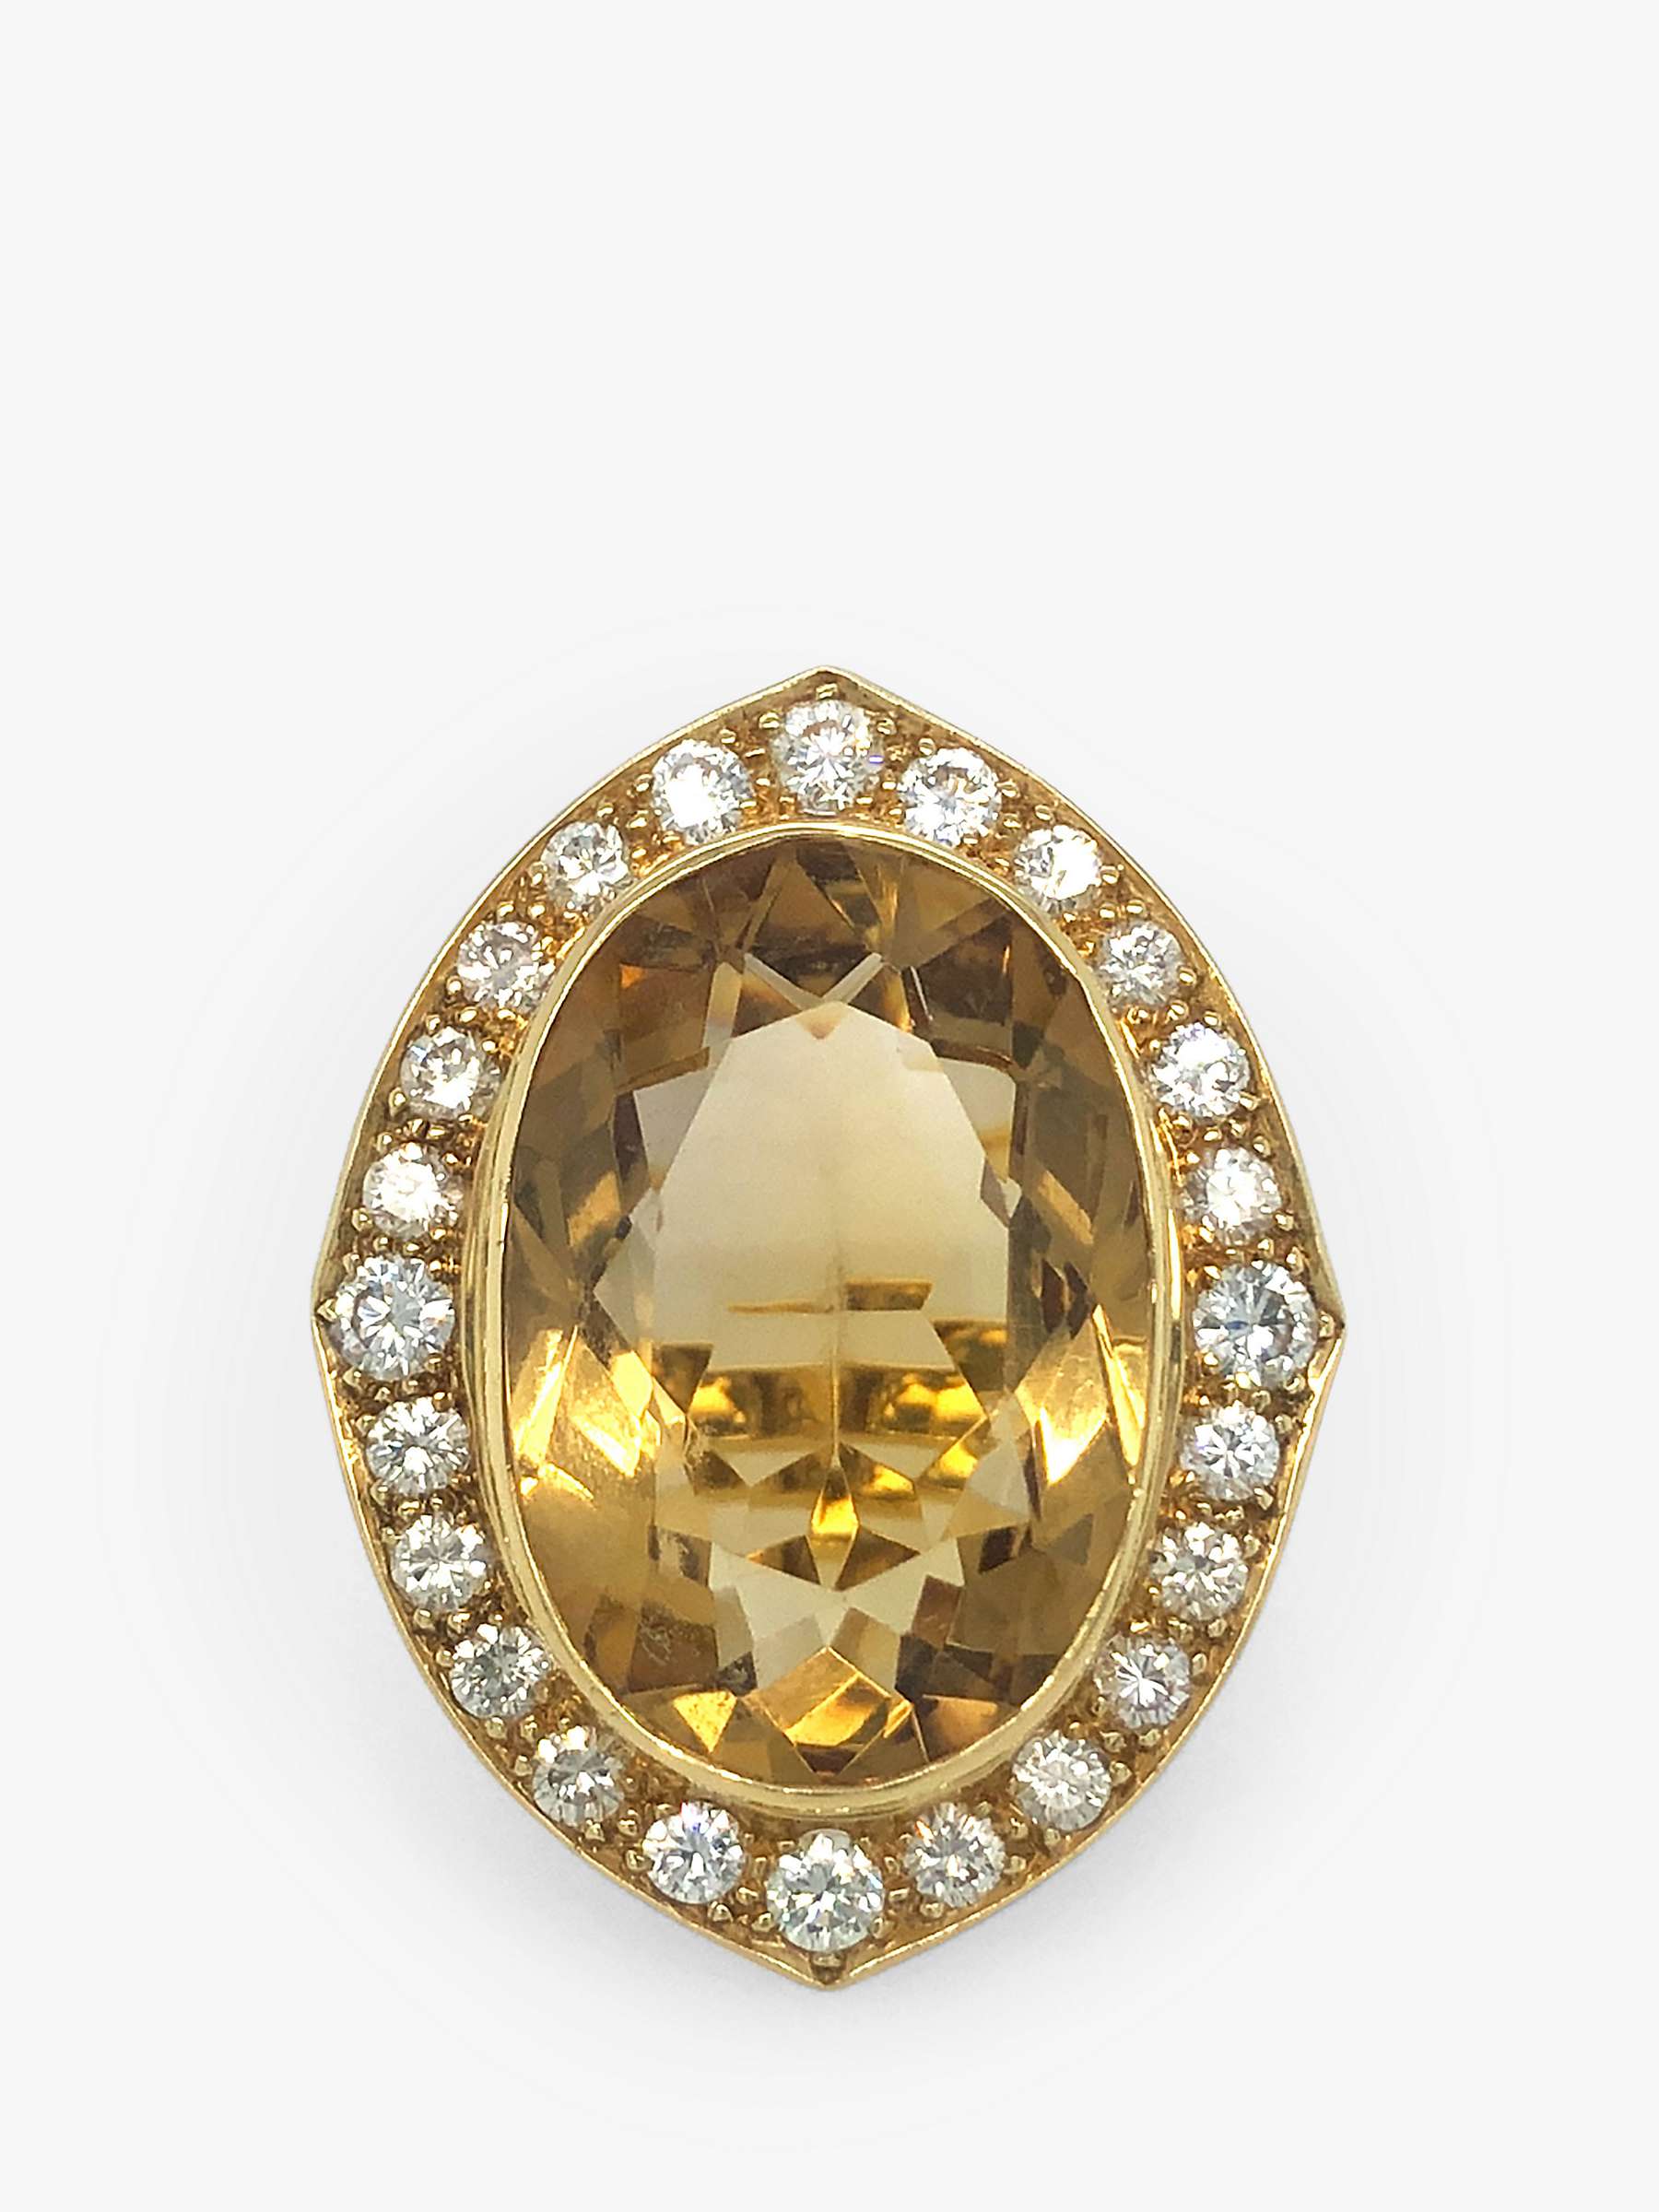 Buy Vintage Fine Jewellery Second Hand 18ct Yellow Gold Diamond & Oval Citrine Ring, Dated Circa 1960s Online at johnlewis.com